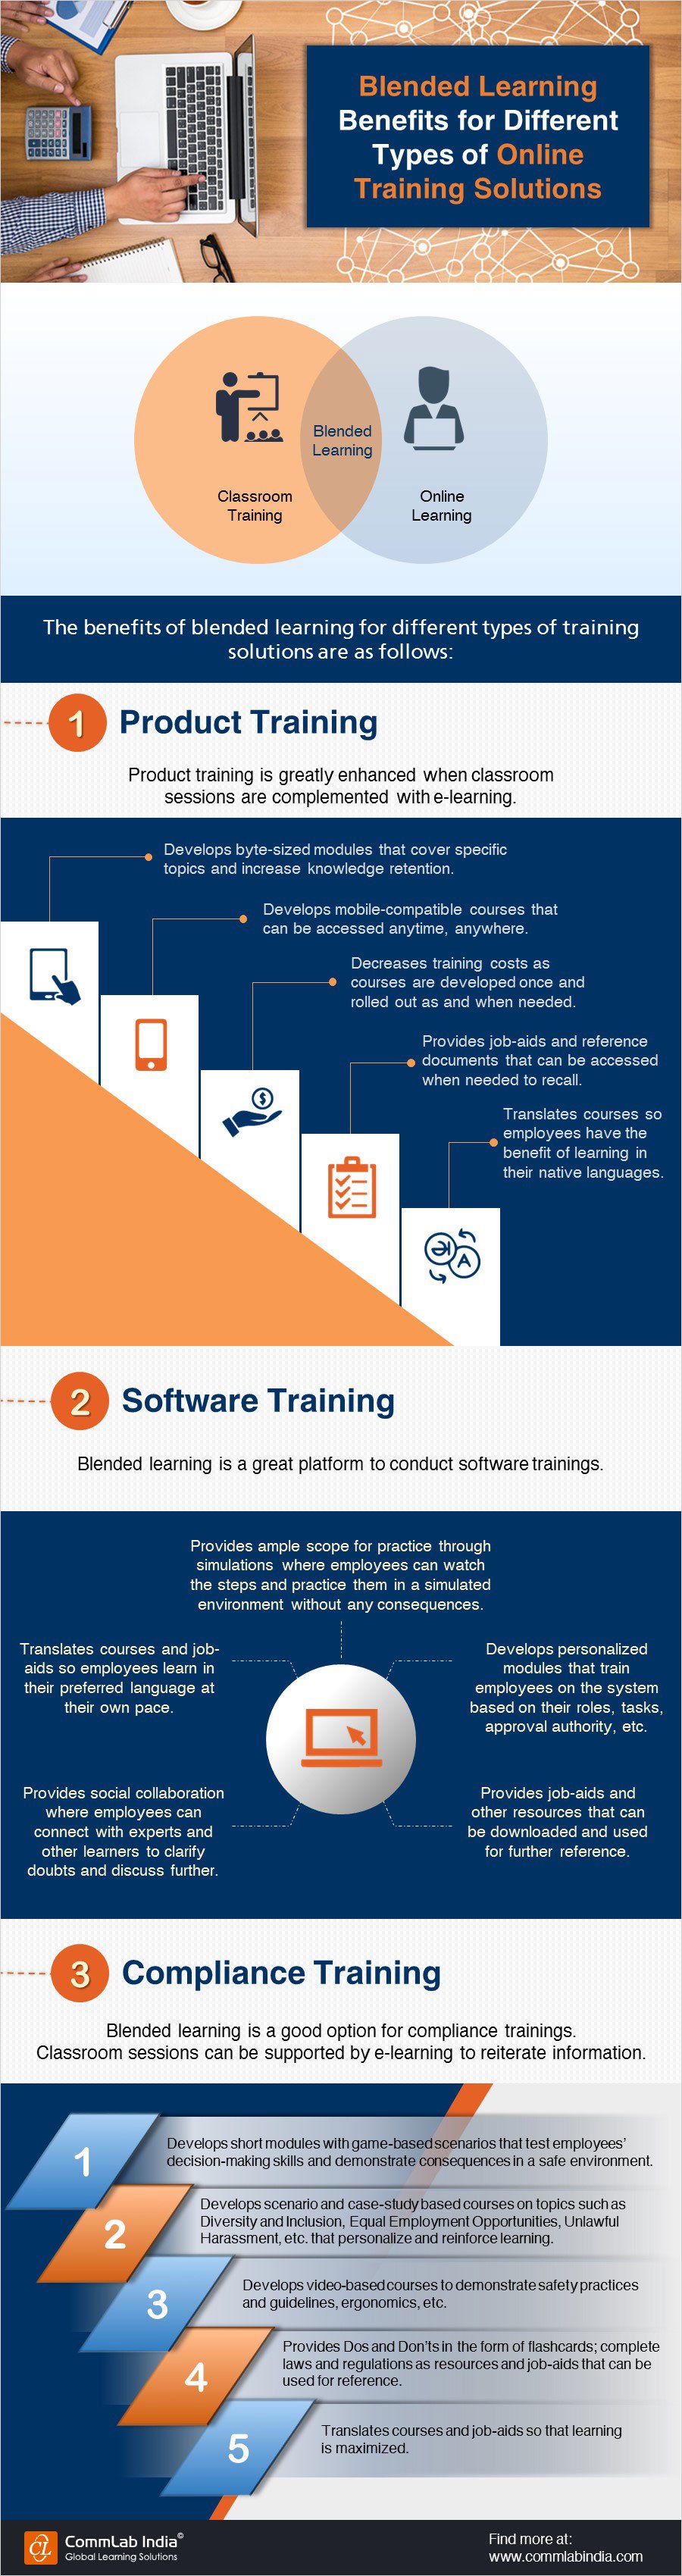 Blended Learning Benefits for Different Types of Online Training Solutions[Infographic]